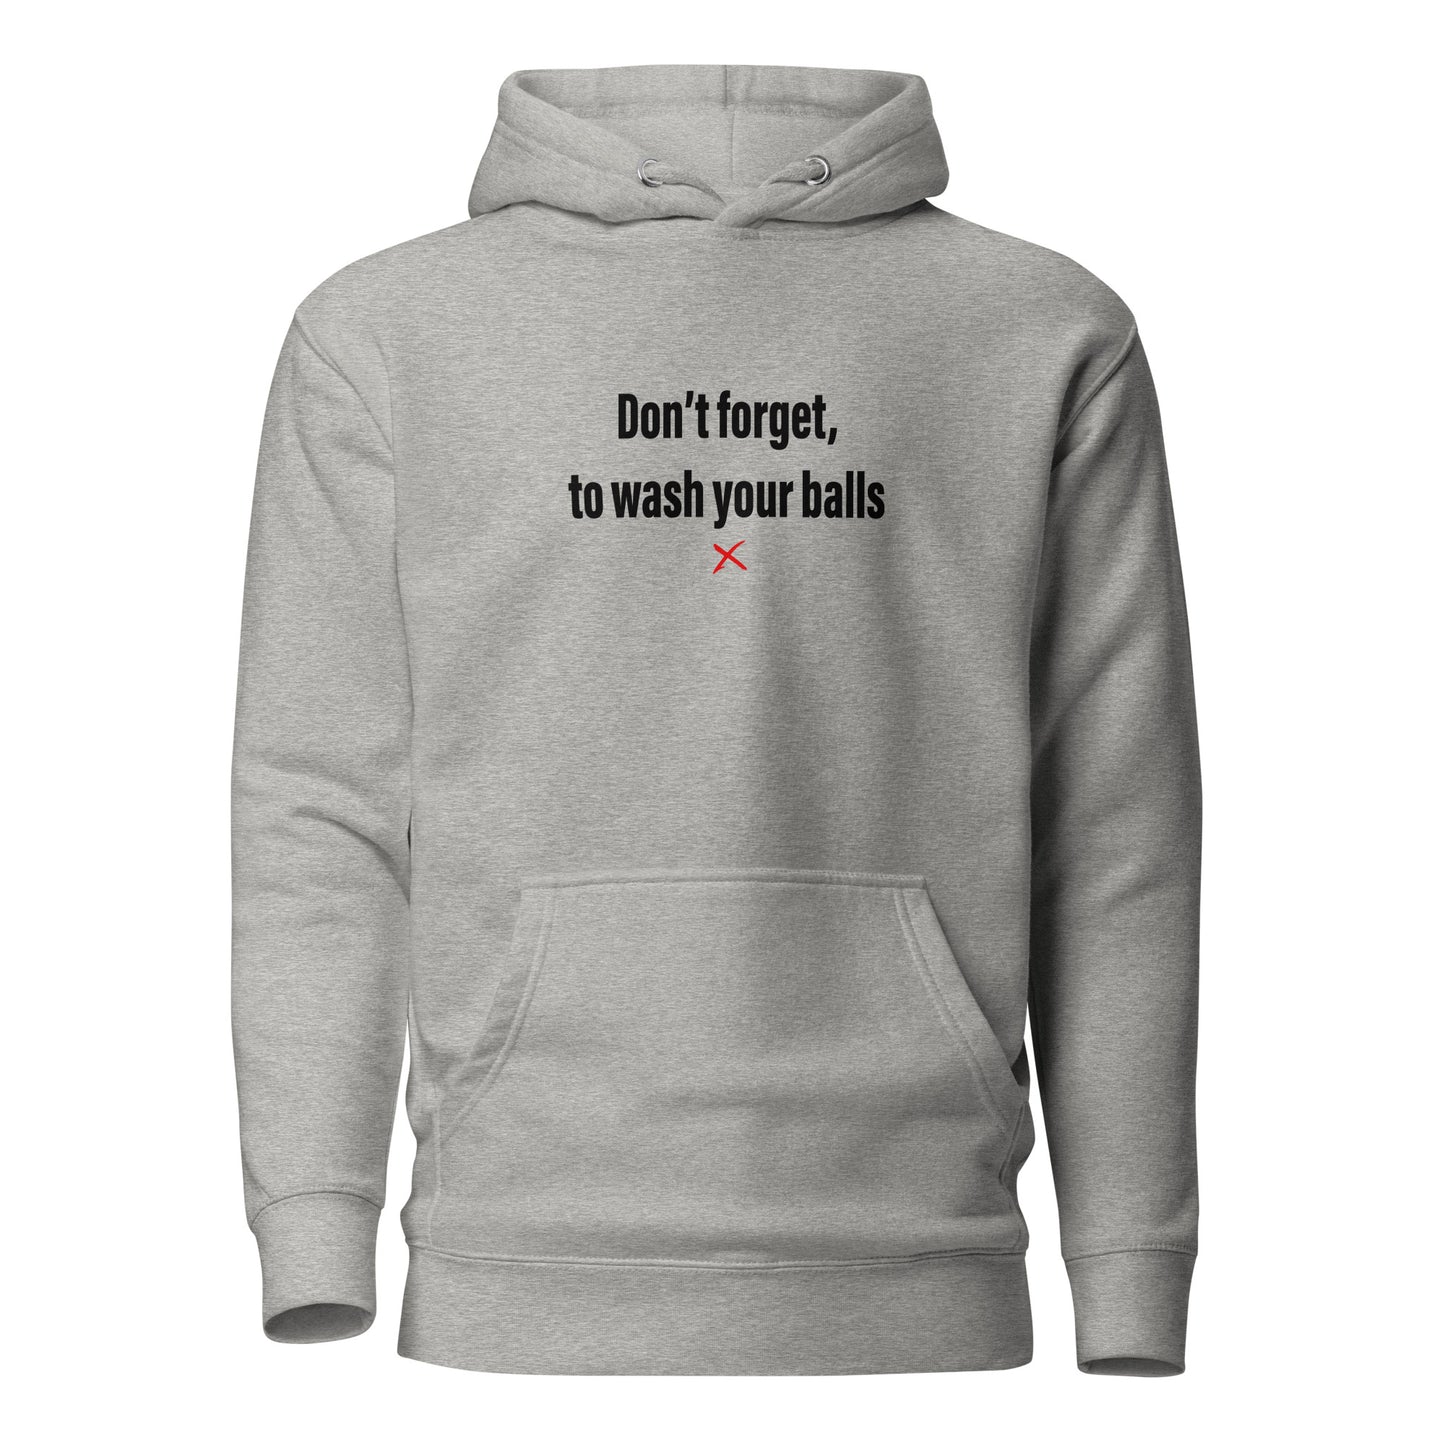 Don't forget, to wash your balls - Hoodie